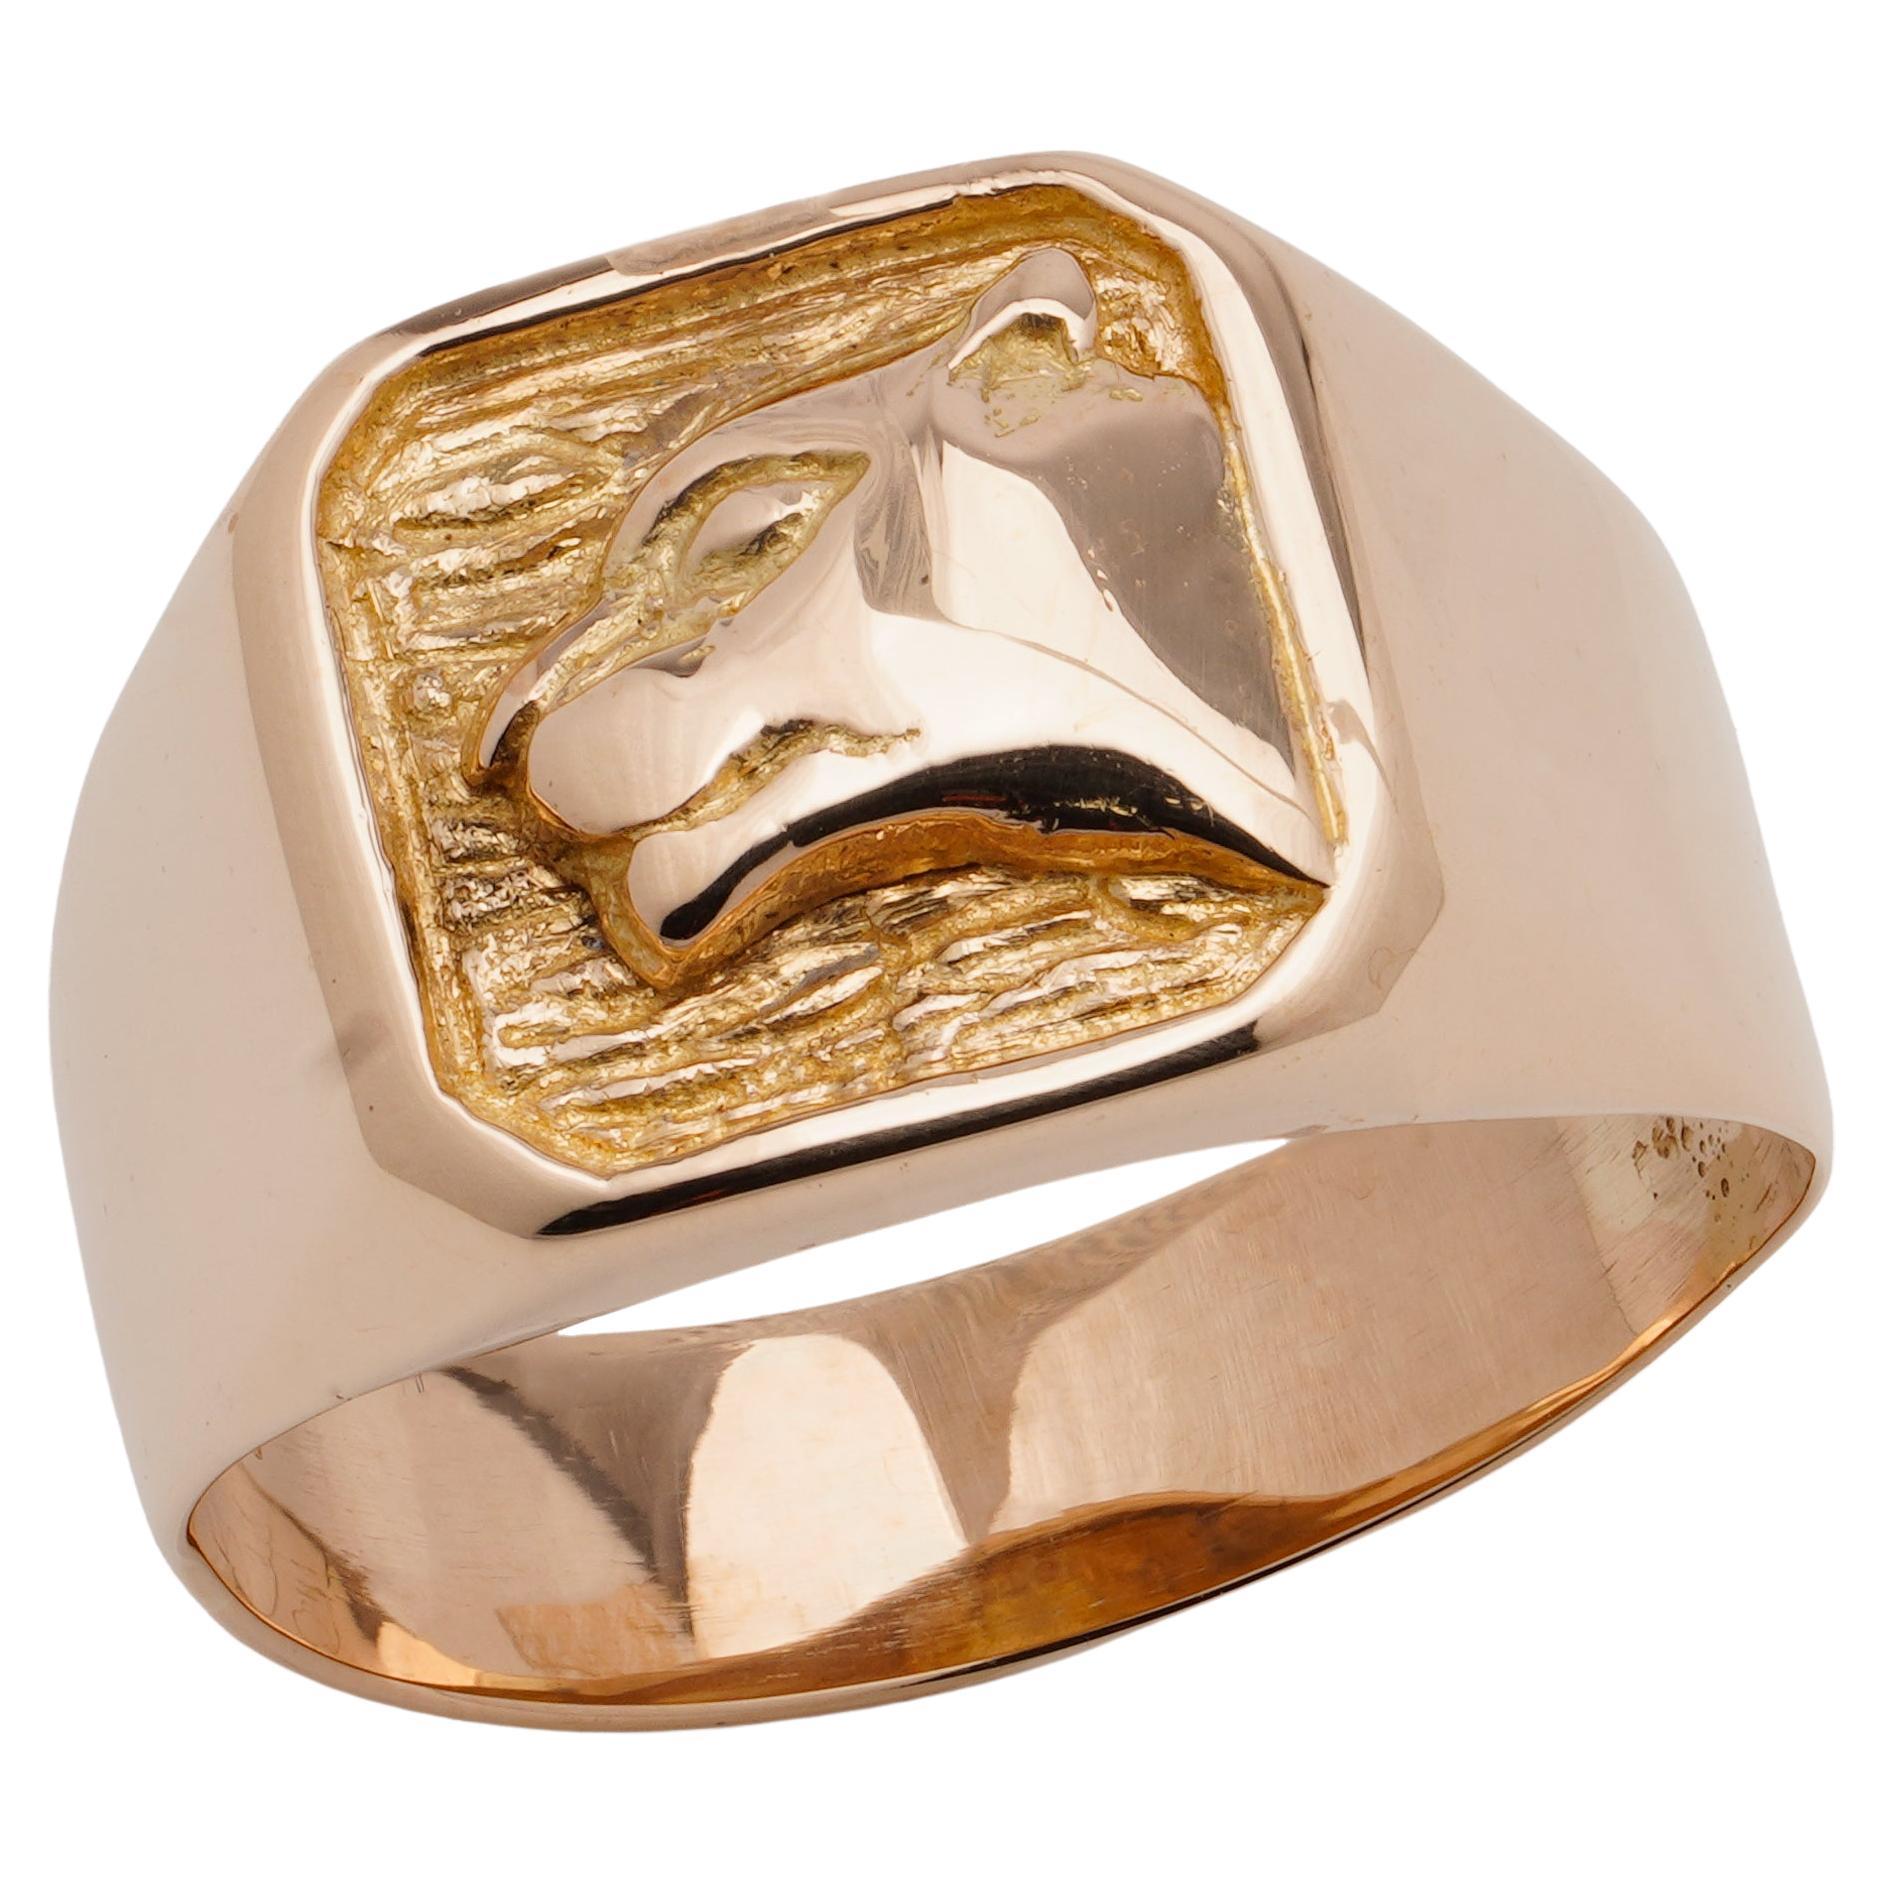 18kt. Yellow Gold Extra Large Size Men's Signet Ring, Featuring Panther's Head